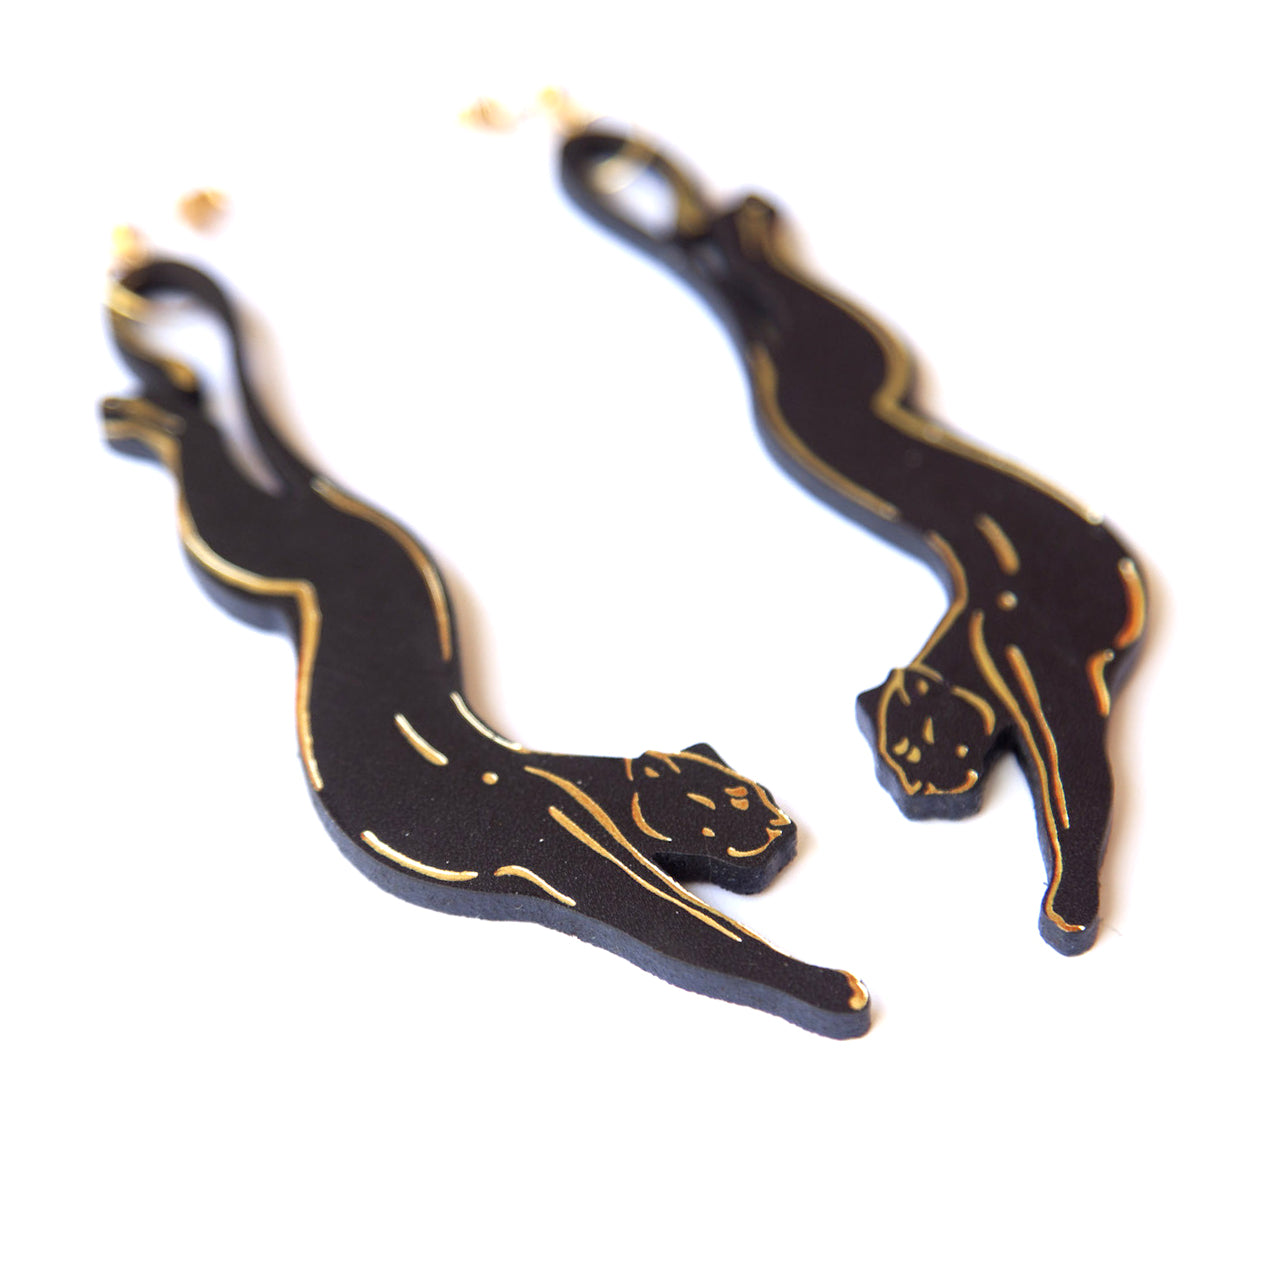 POUNCING PANTHER . earrings